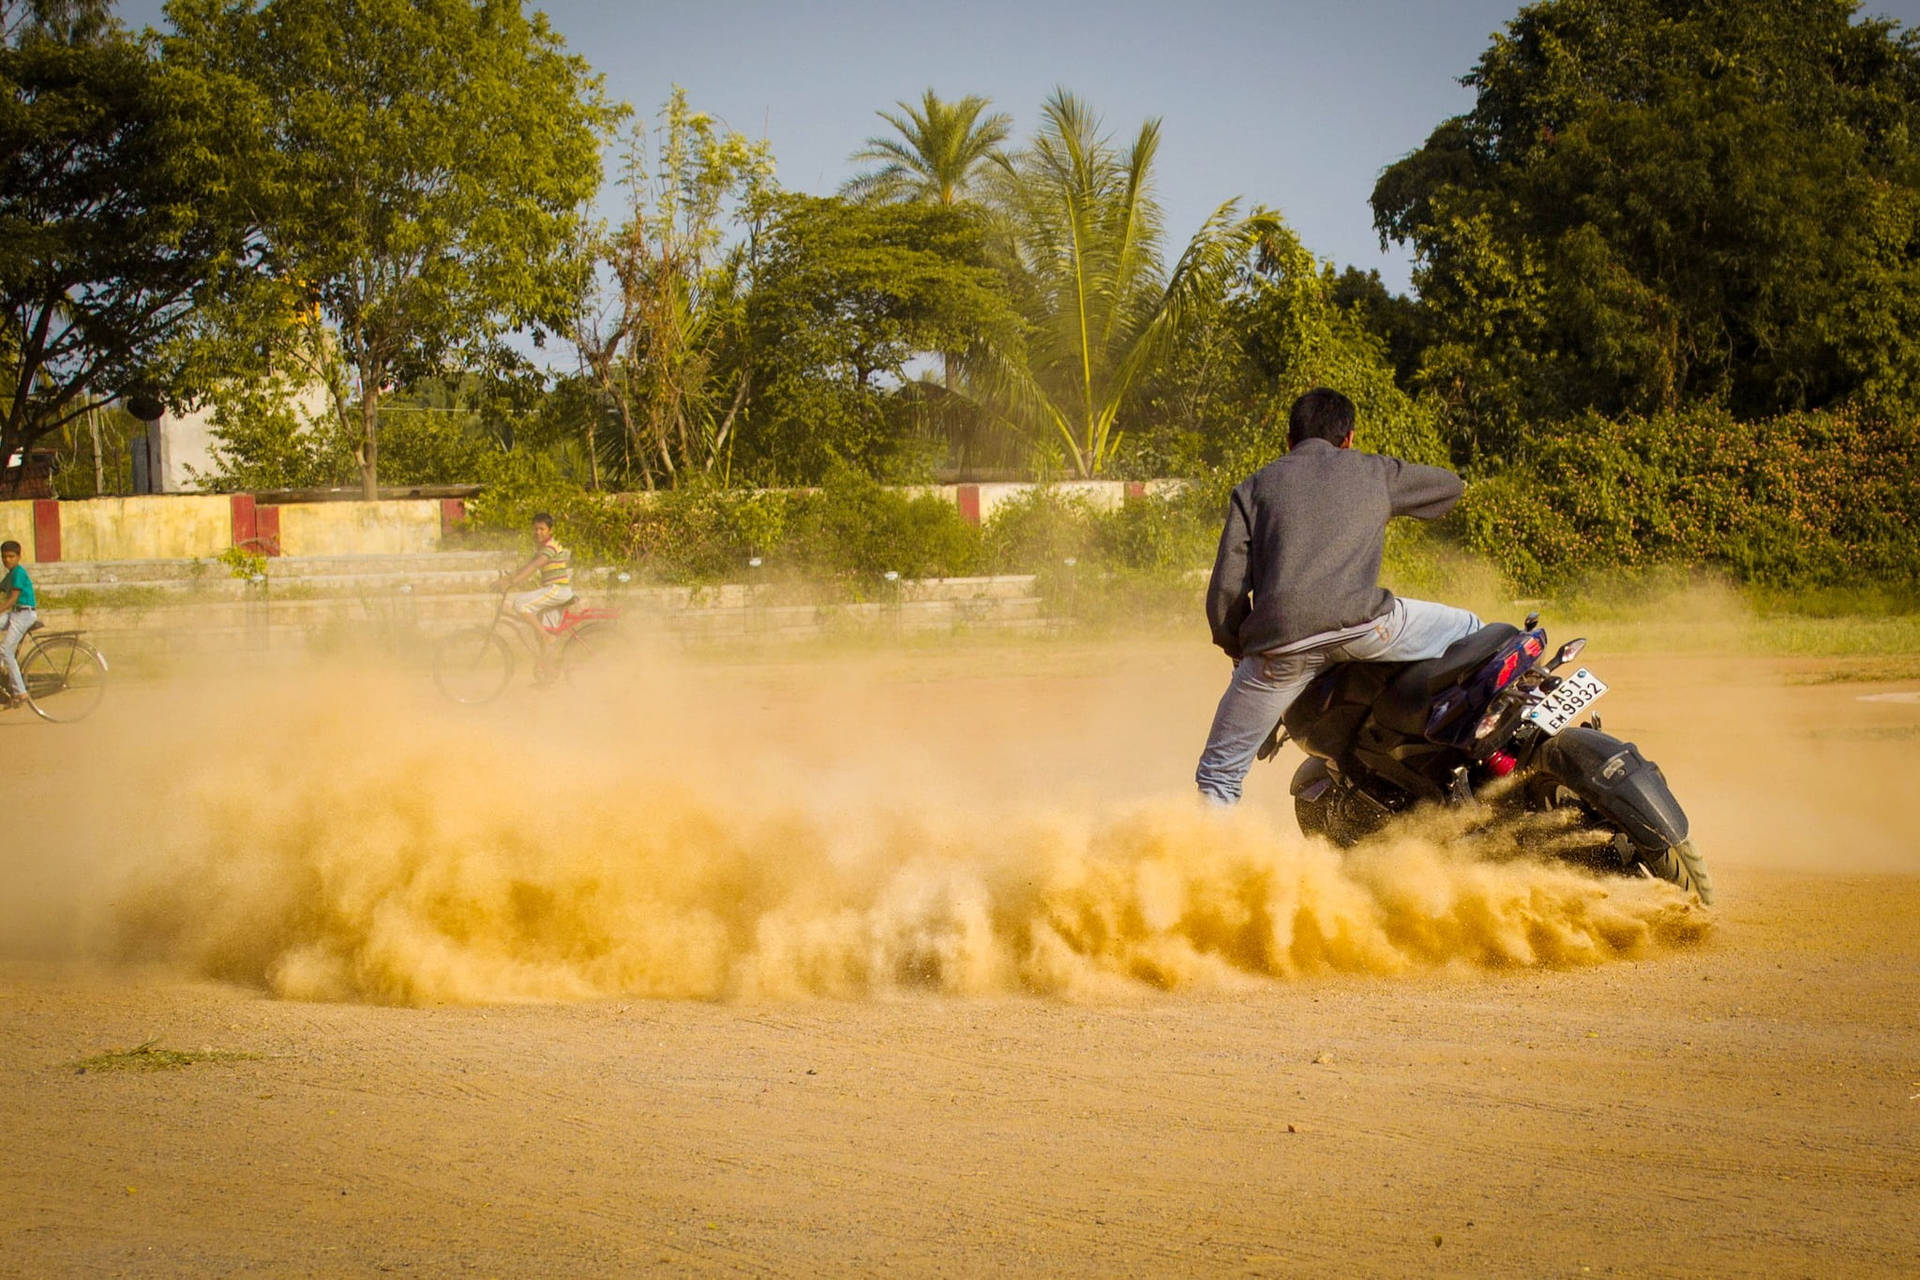 Ns 200 Pulsar Man Riding With Dust